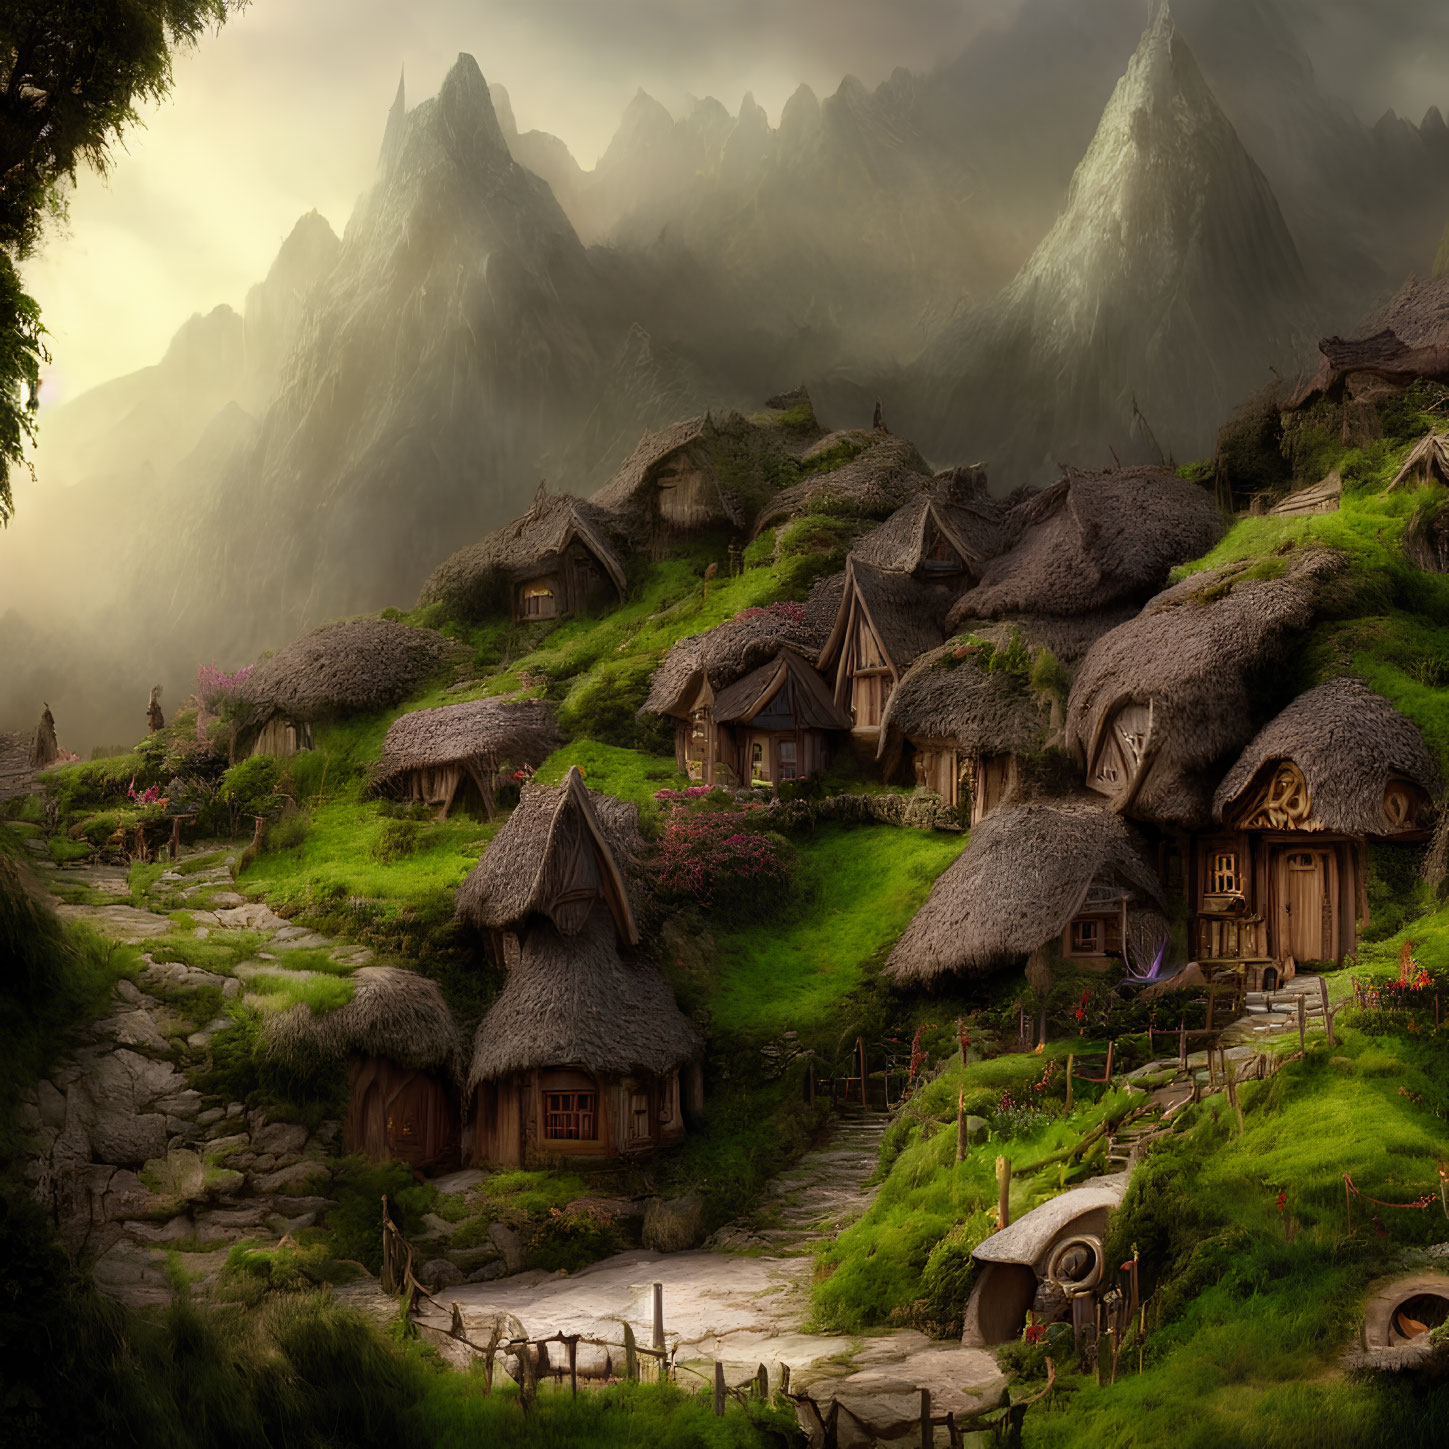 Tranquil fantasy village with thatched-roof cottages nestled among lush green hills